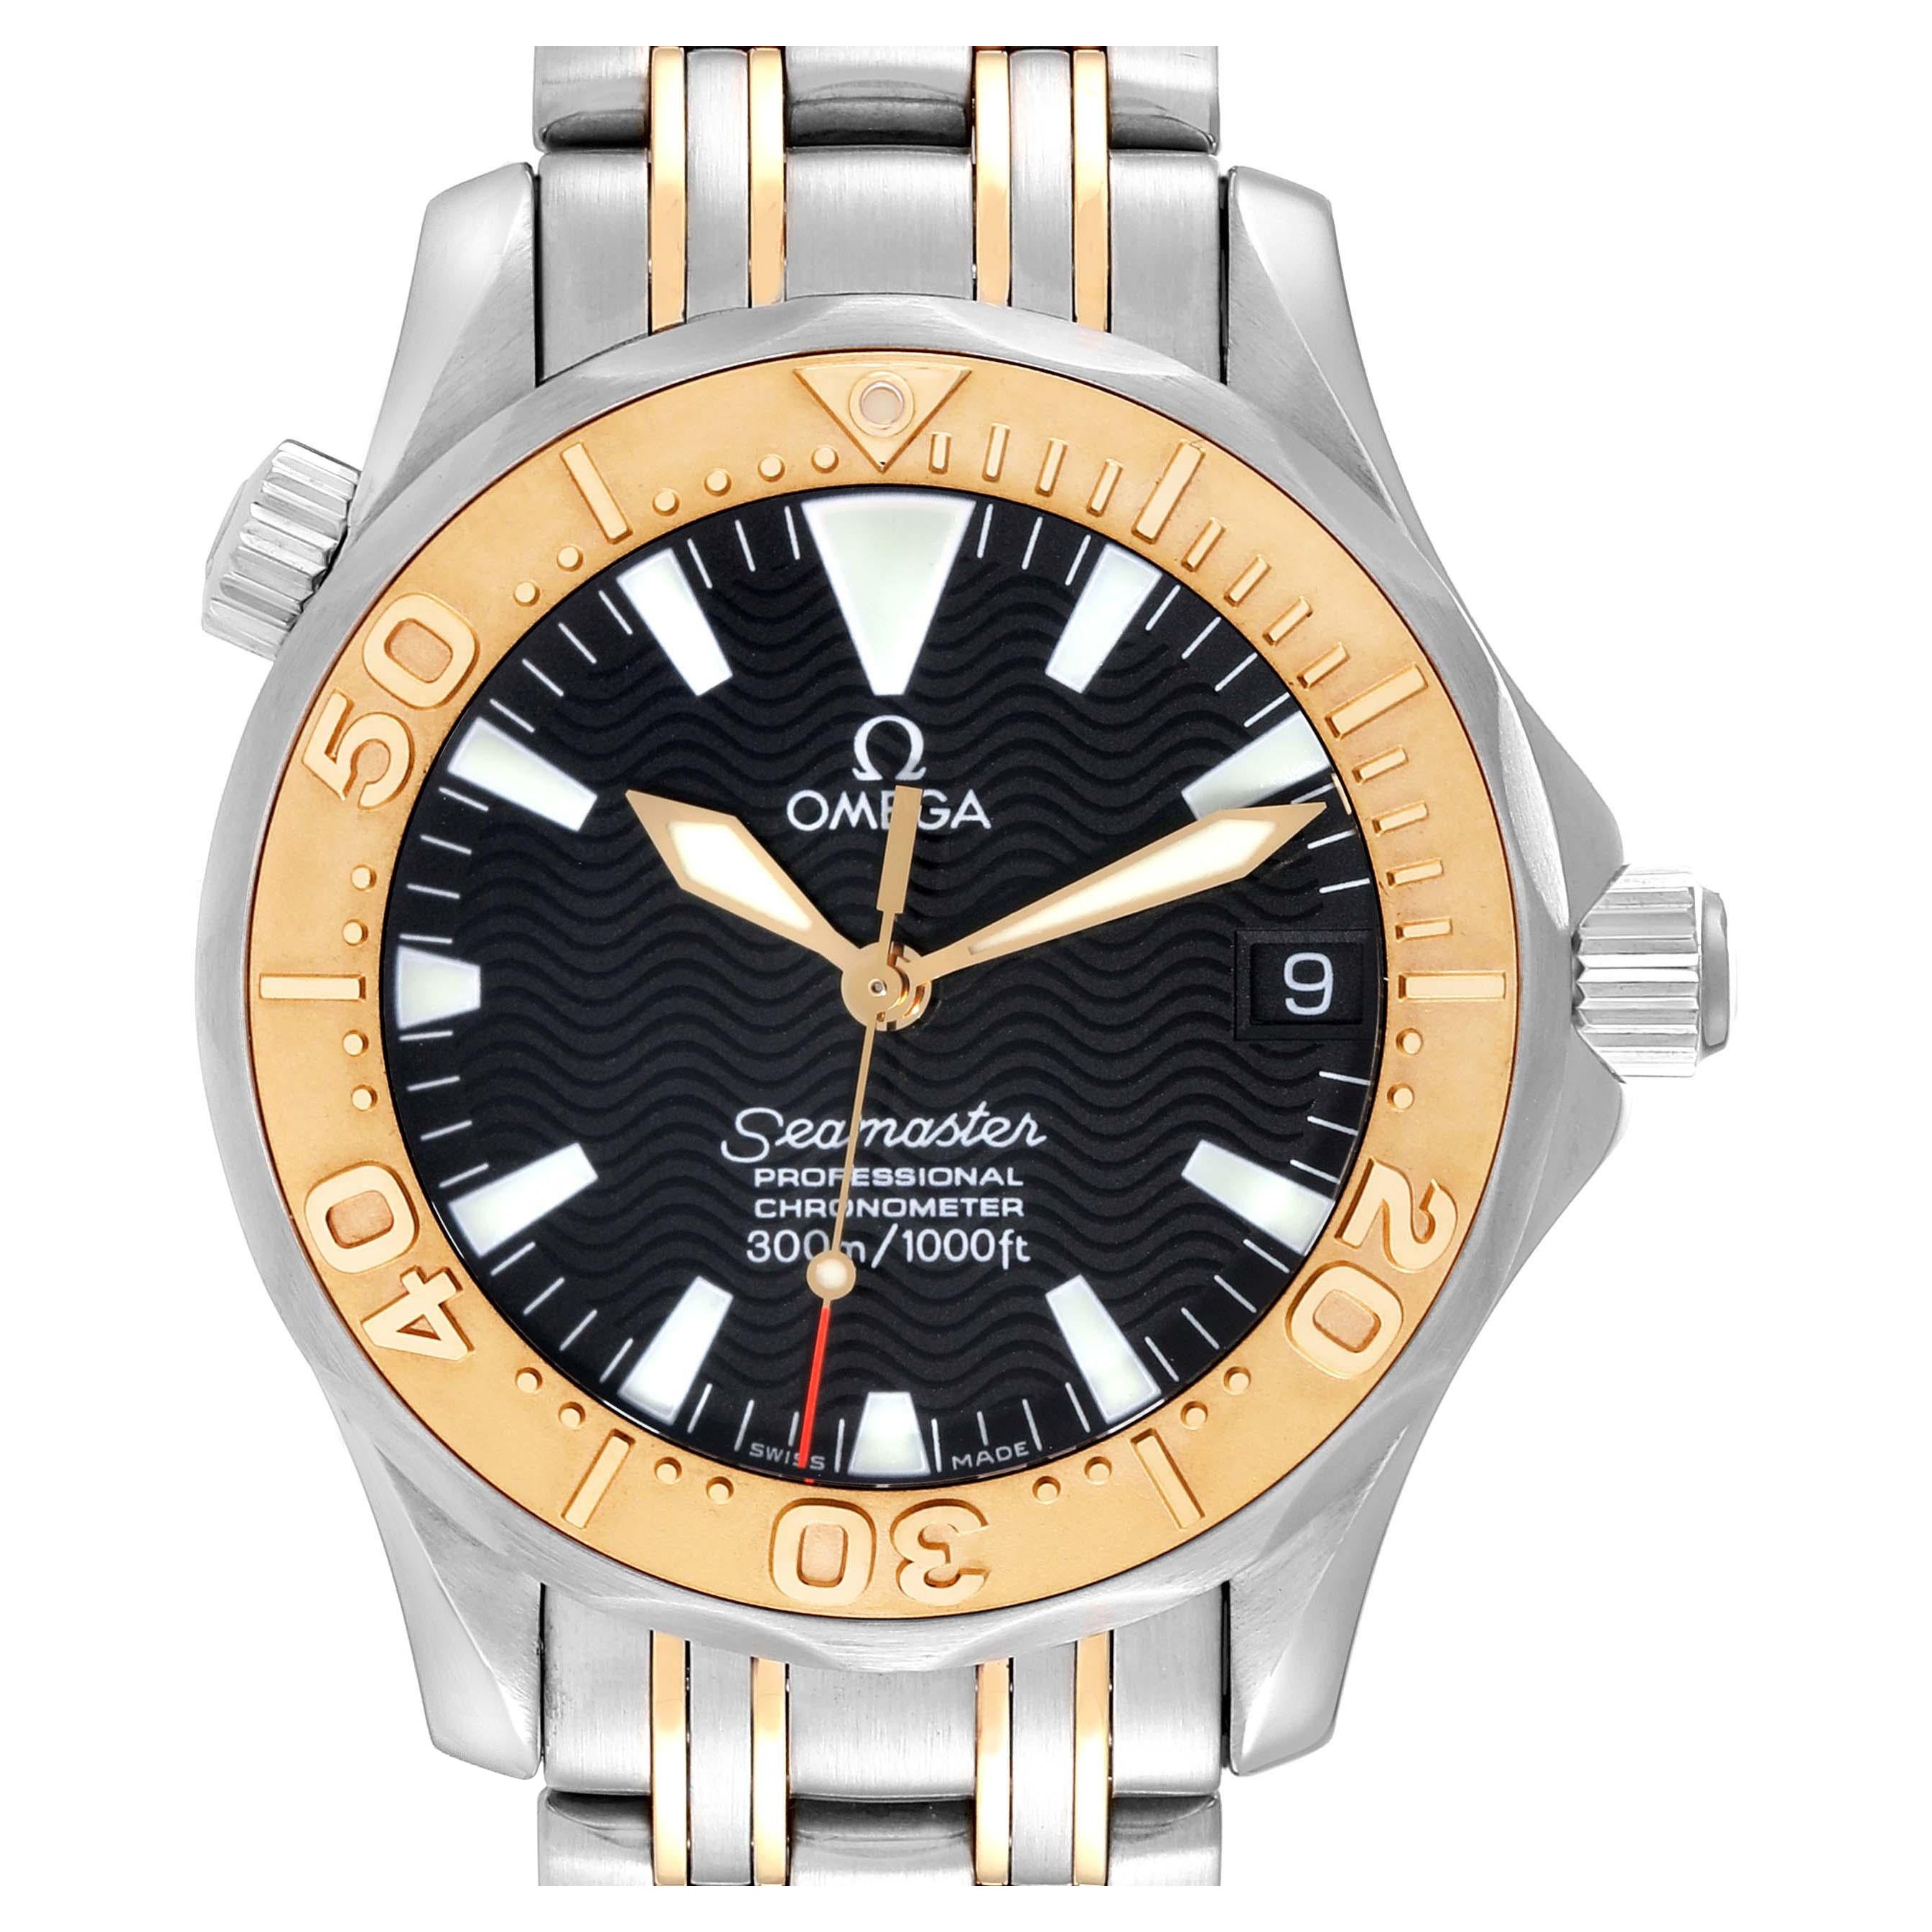 Does Omega make a 36mm watch?